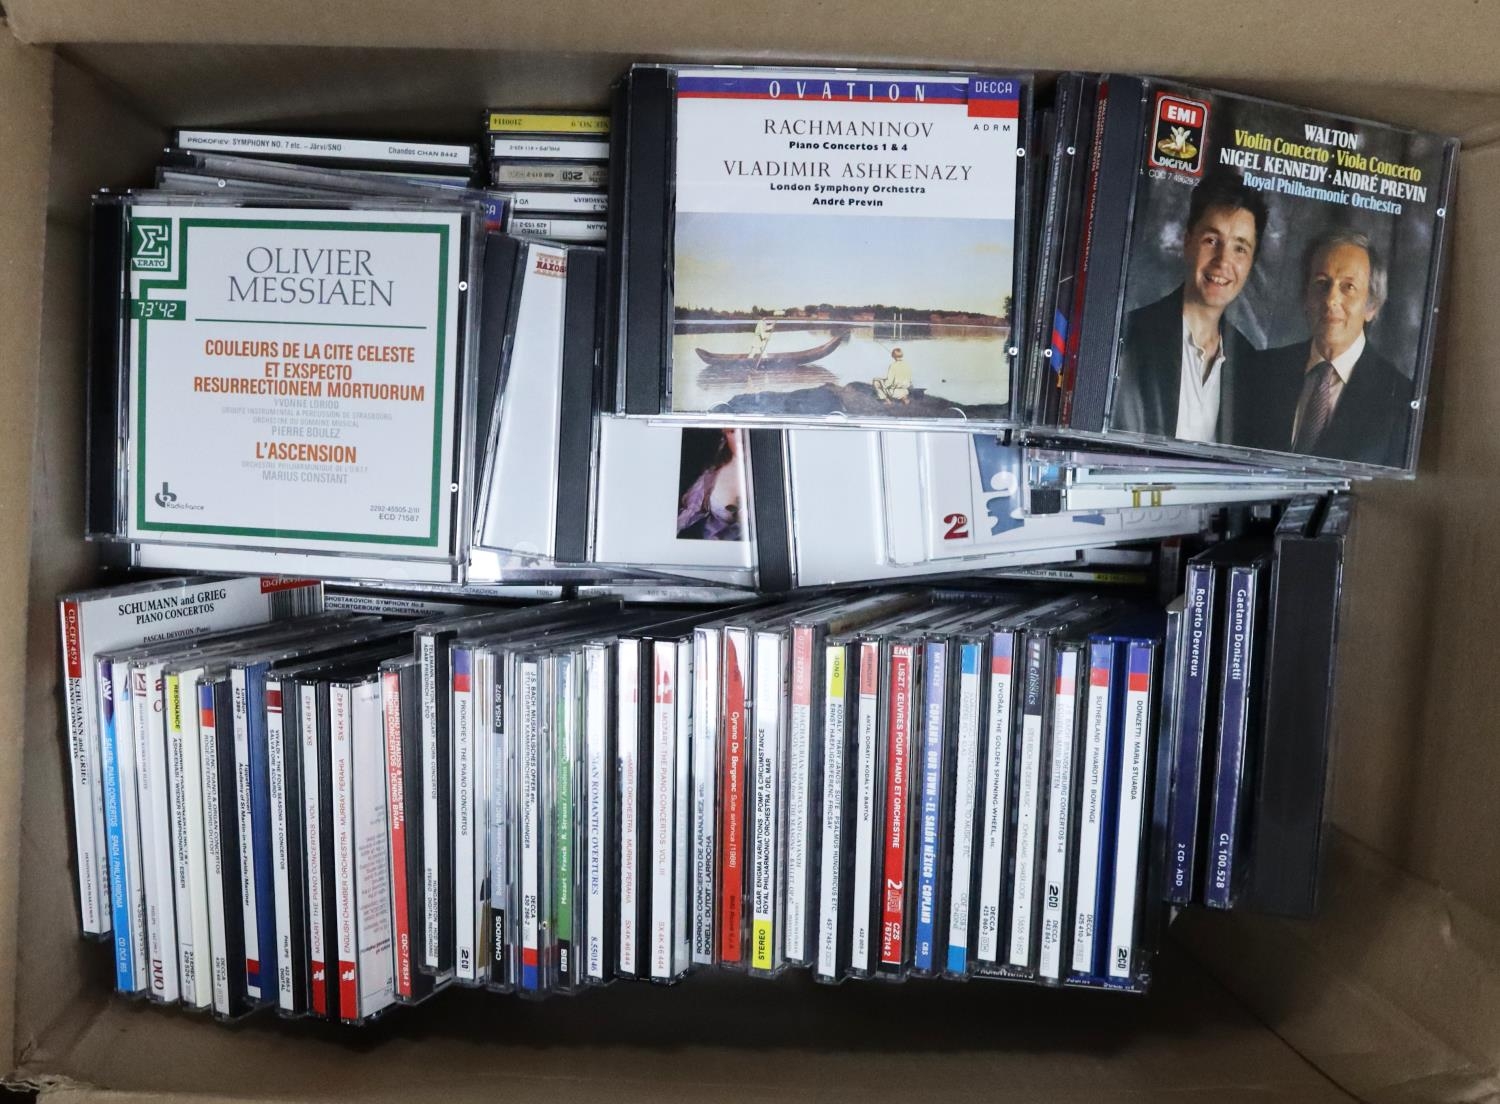 Compact Disc CDs CLASSICAL. A large collection of quality classical recordings, including box